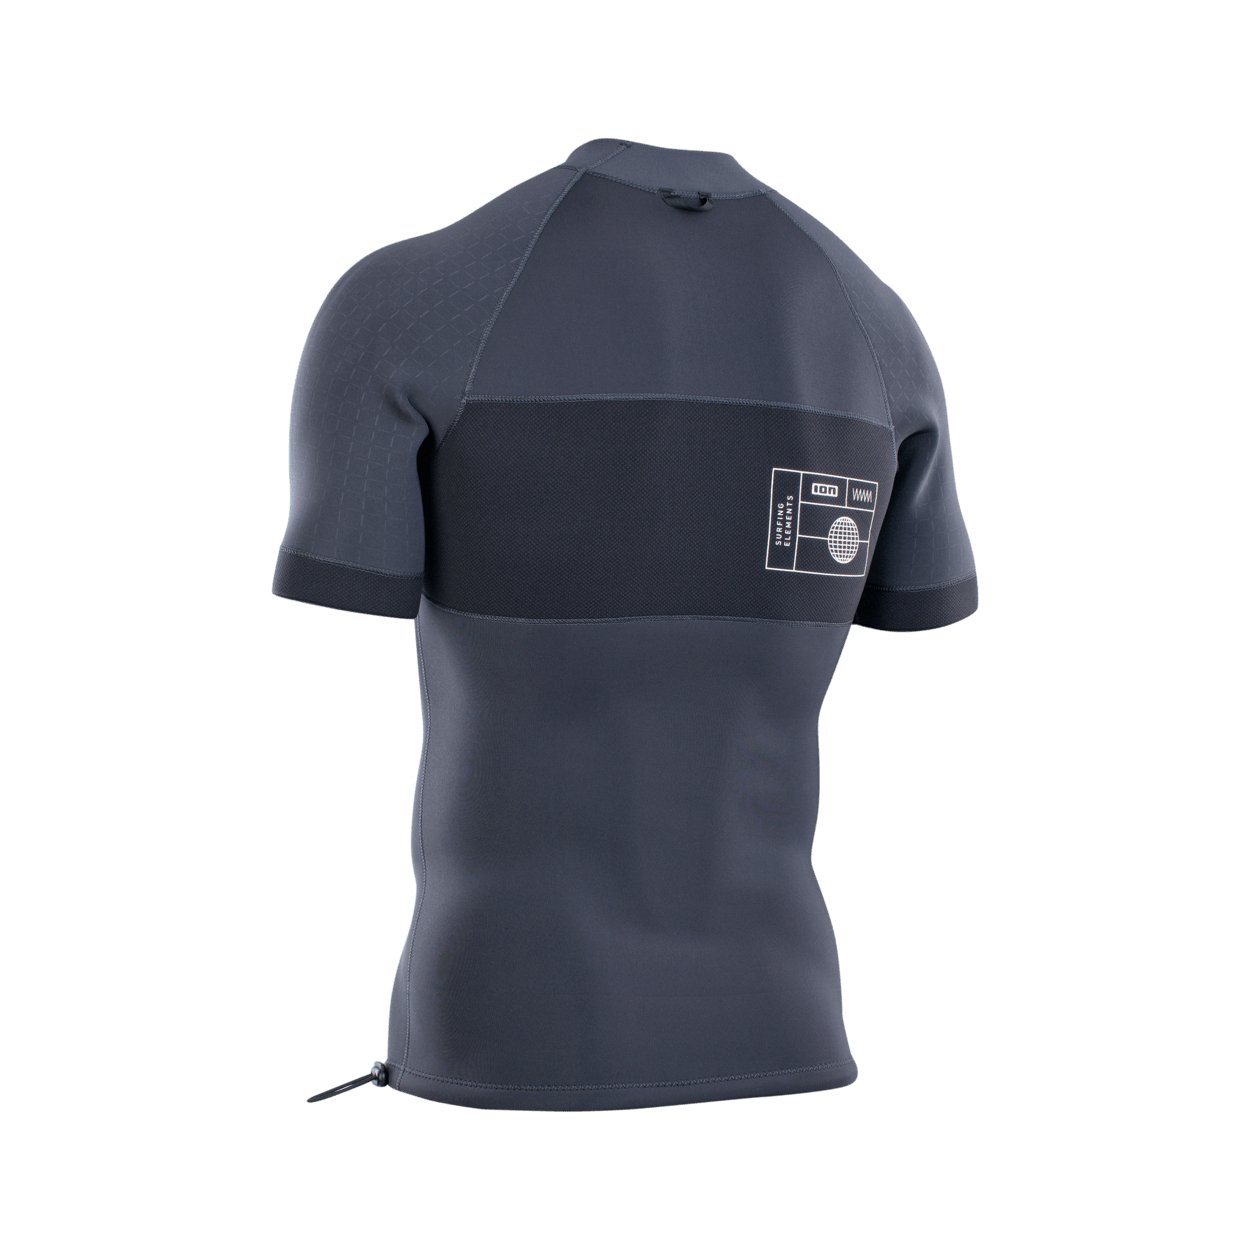 ION Neo Top 2/2 SS men 2022 - Worthing Watersports - 9010583058788 - Tops - ION Water